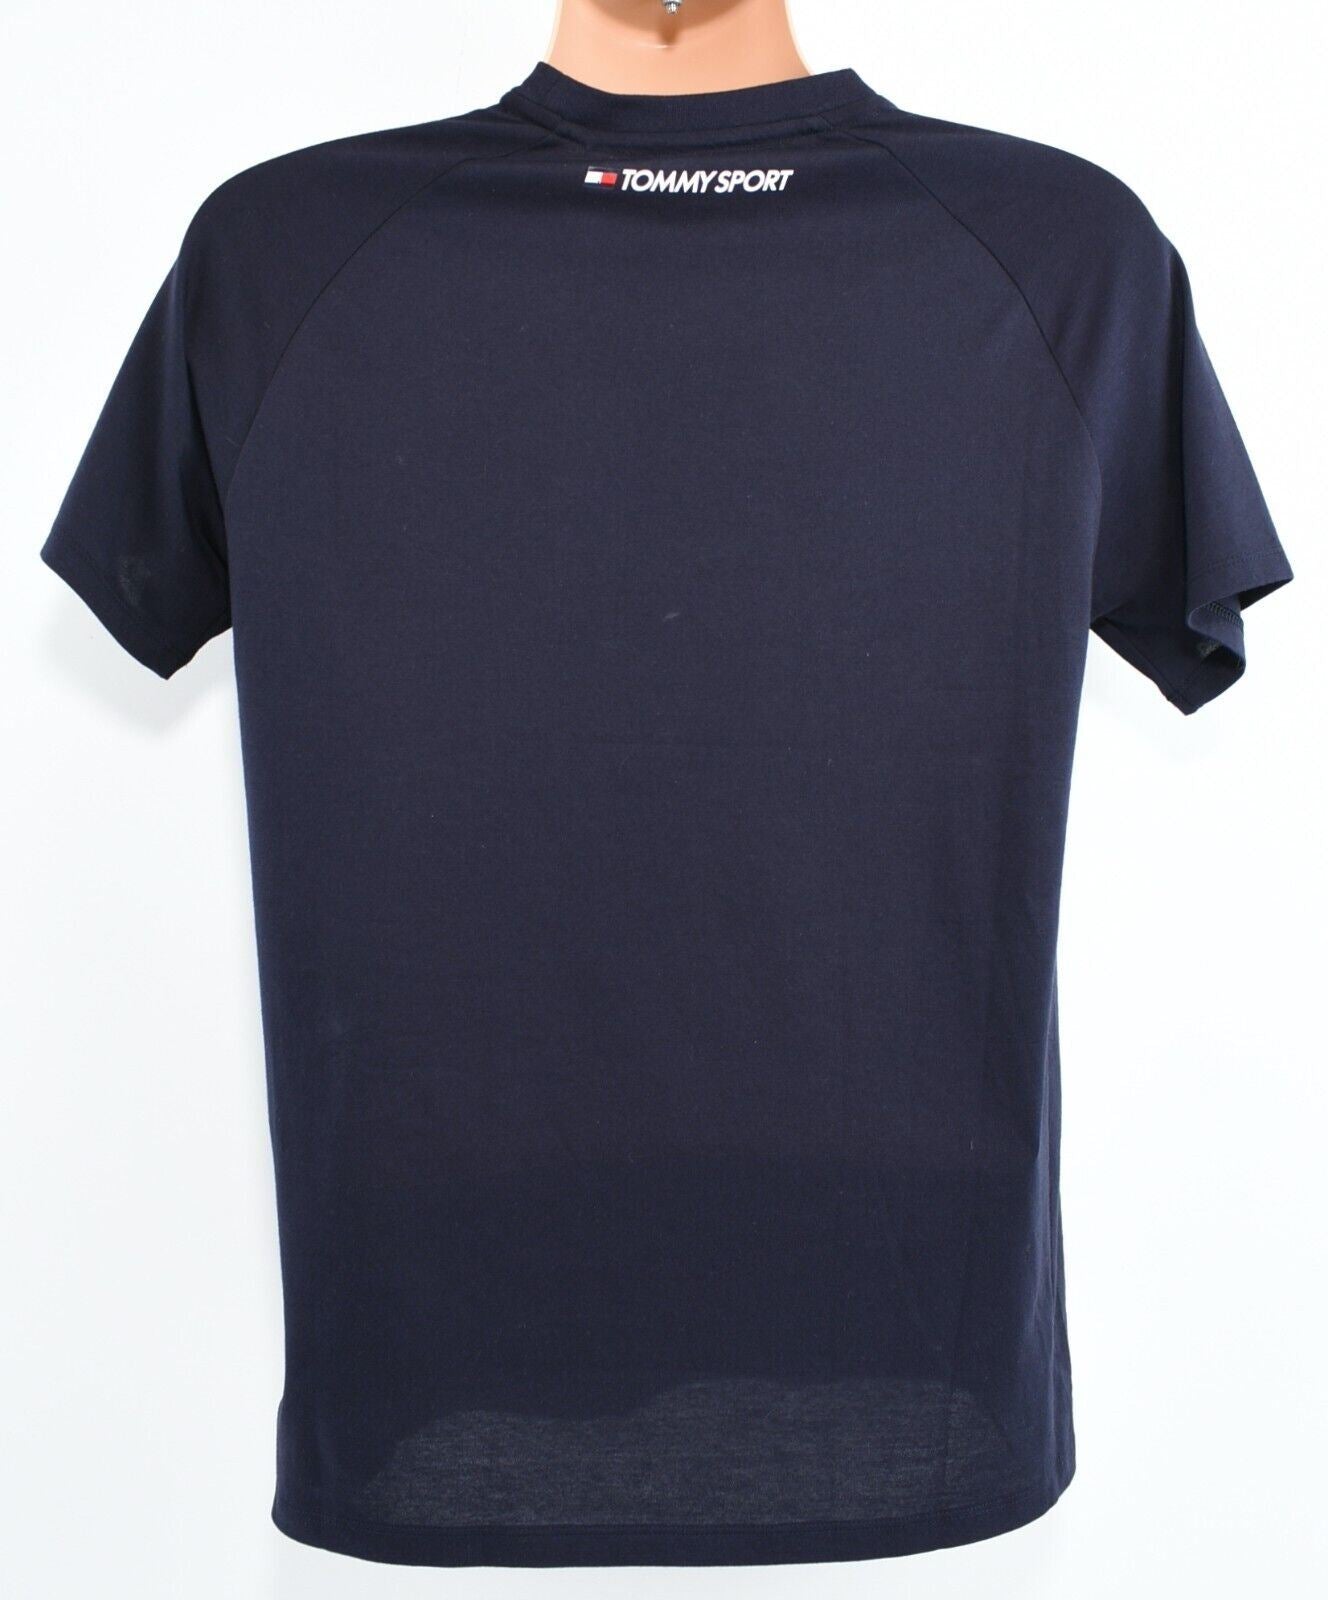 TOMMY HILFIGER - TOMMY SPORT Men's Chest Logo T-shirt, Blue, size SMALL